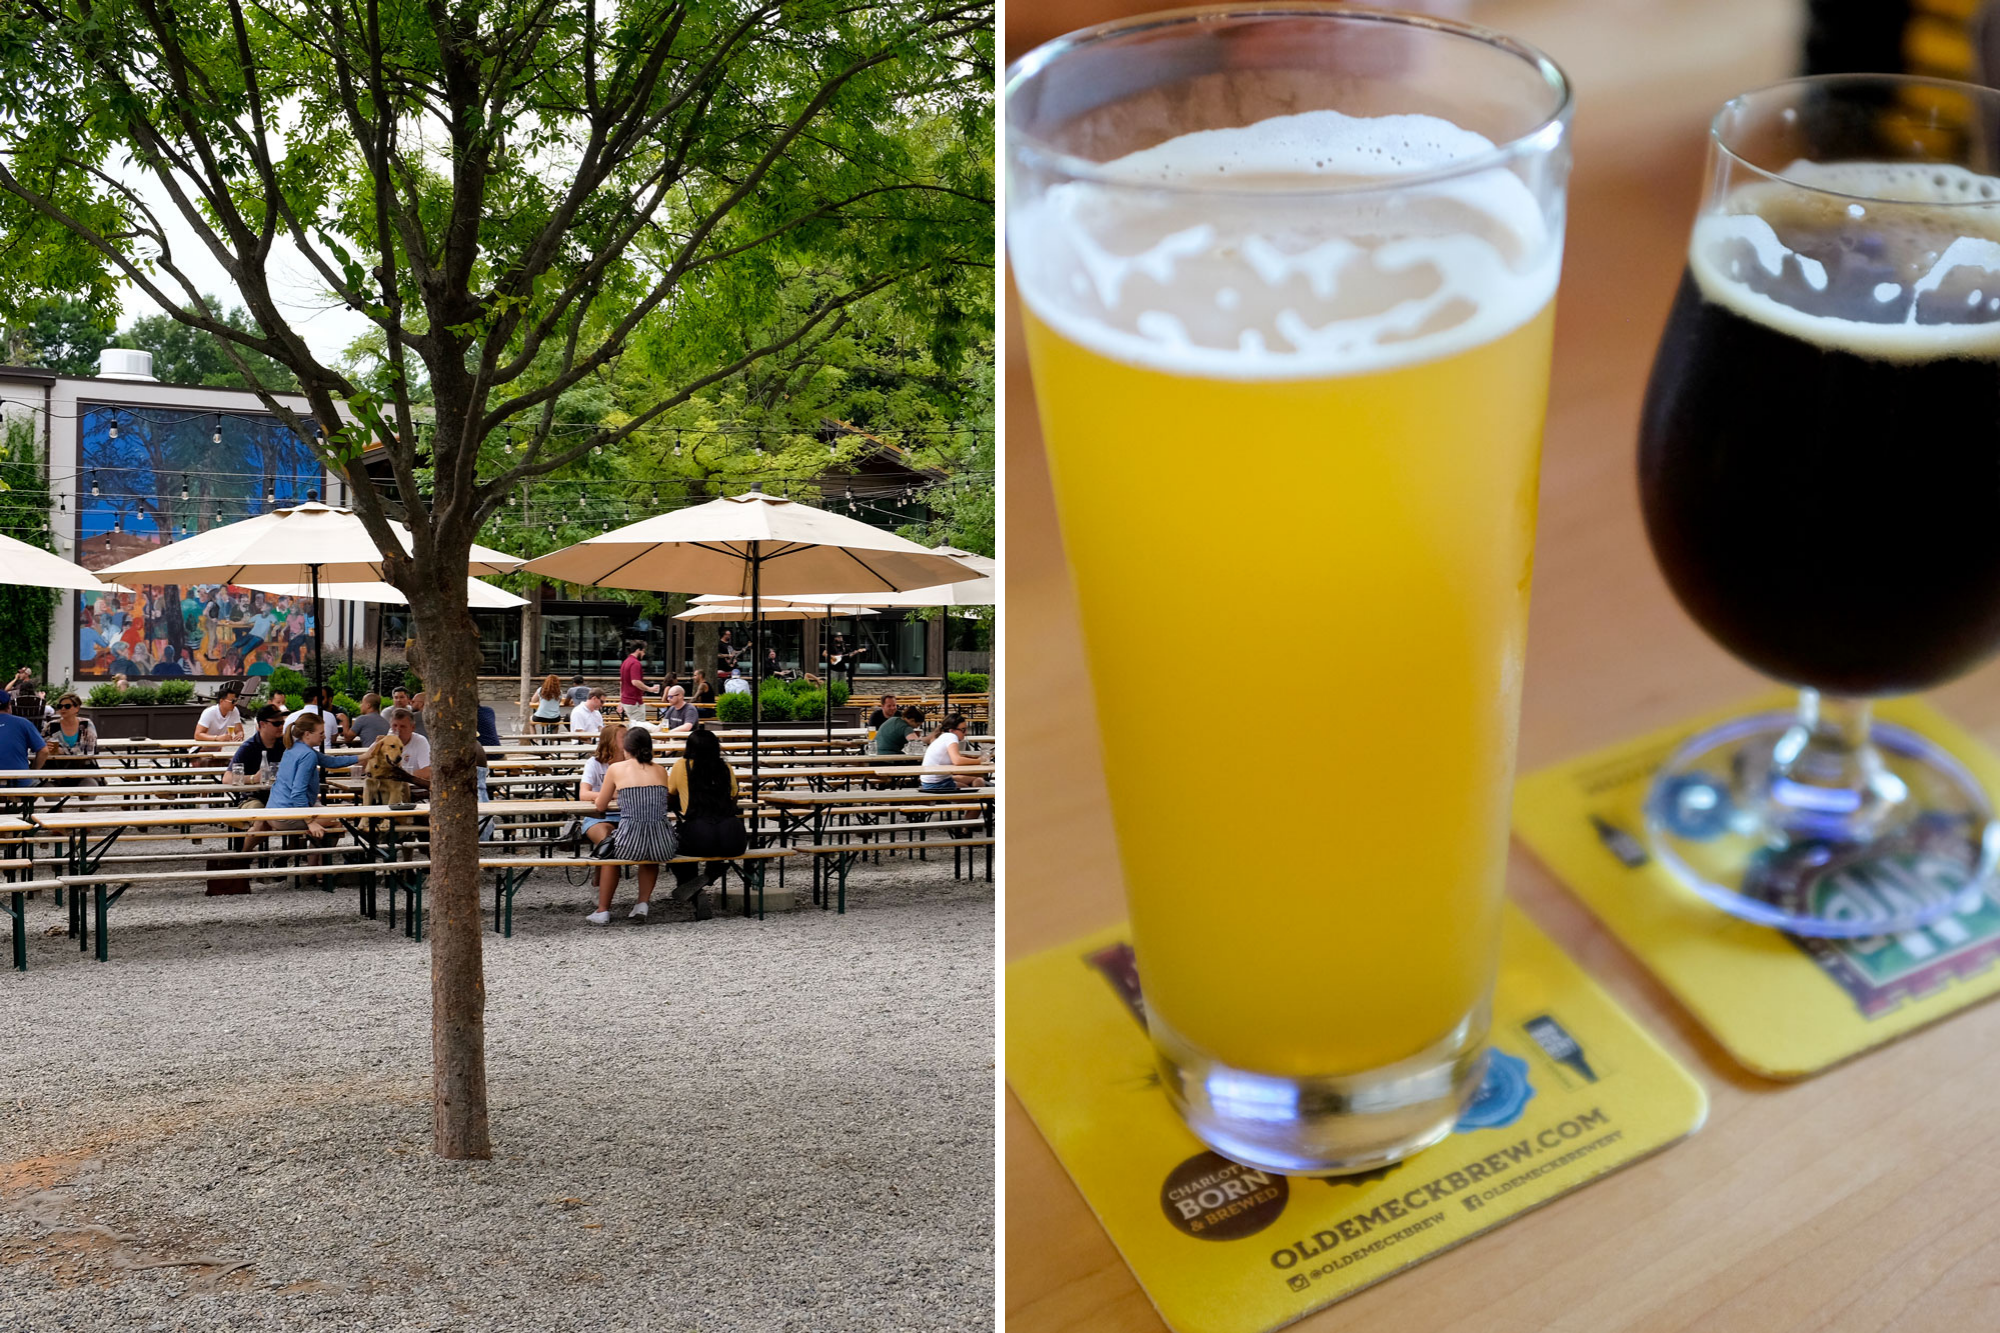 Collage of two photos. On left is a biergarten with long tables and umbrellas and lots of people, and on the right is two beers, a light beer in a tall glass and a dark beer in a snifter-style glass